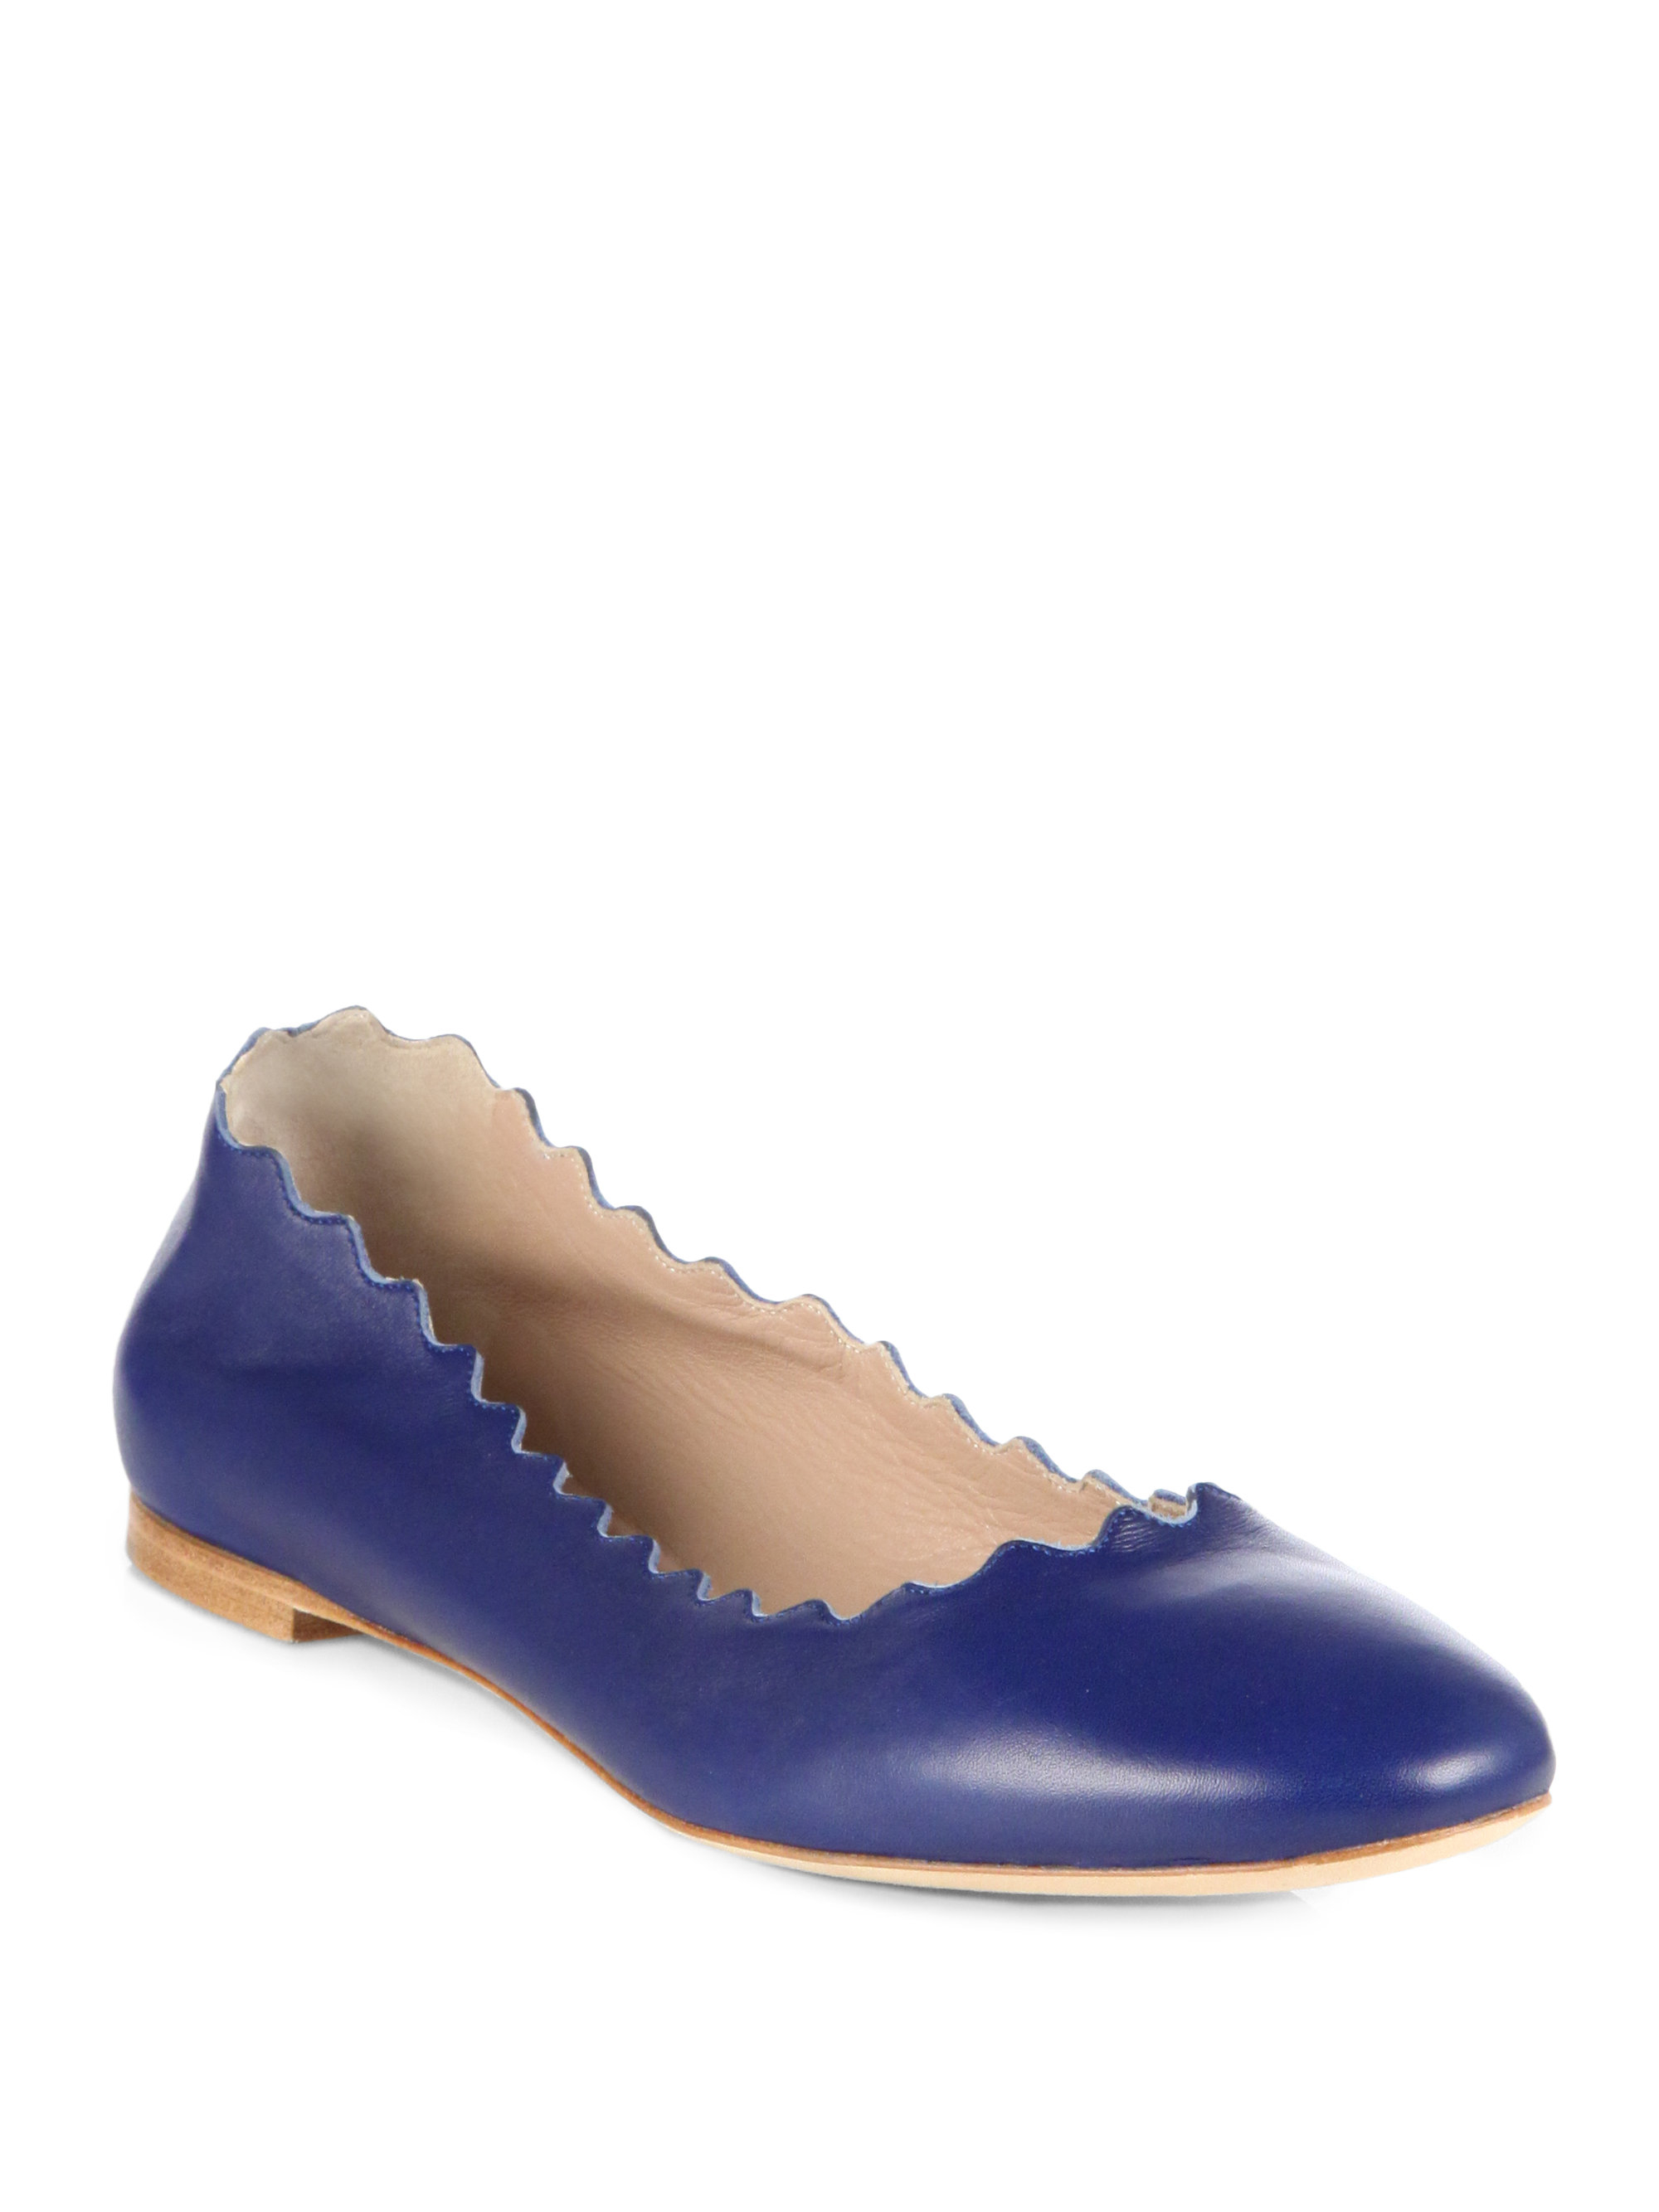 Lyst - Chloé Scalloped Leather Ballet Flats in Blue